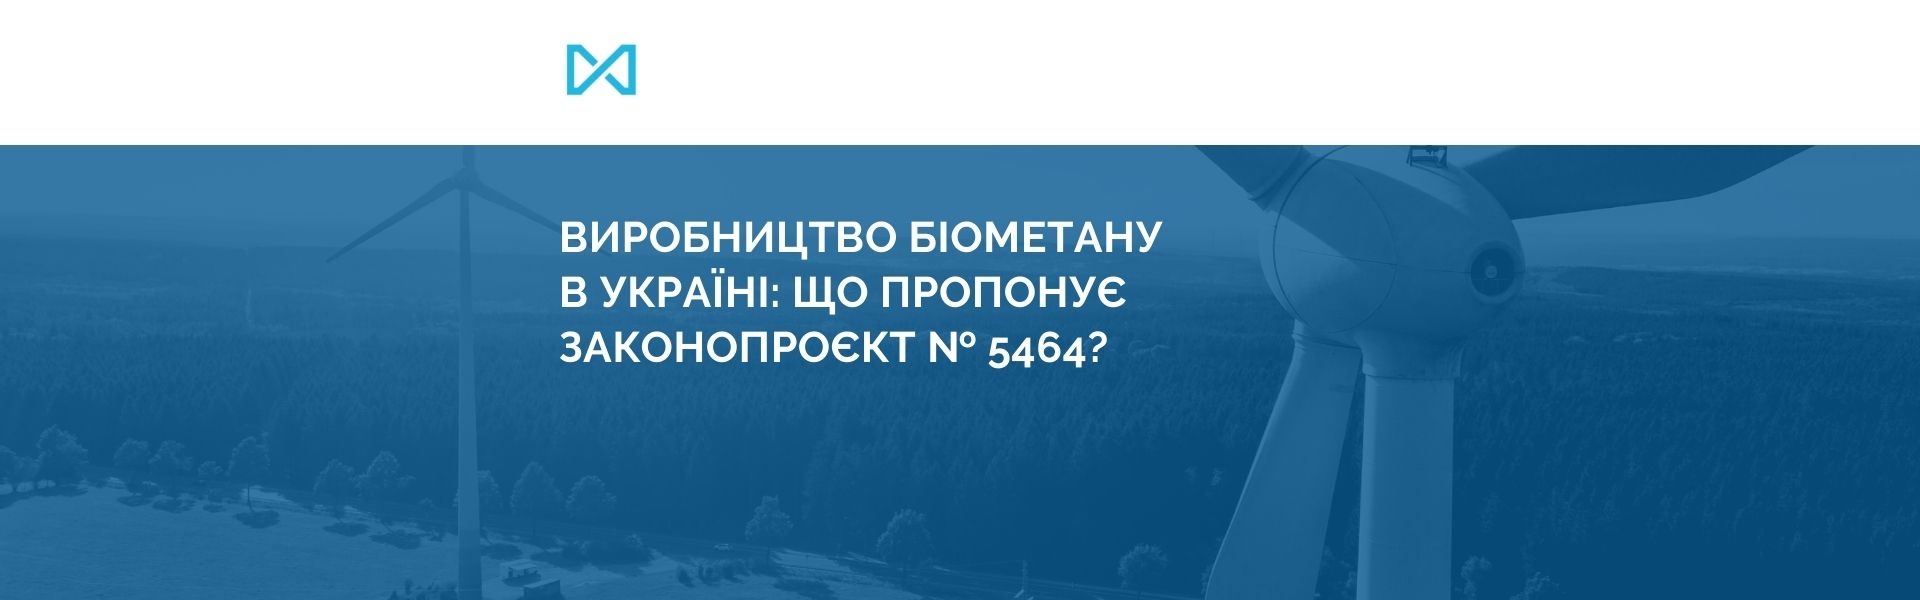 Biomethane production in Ukraine: what does the draft law No. 5464 propose?